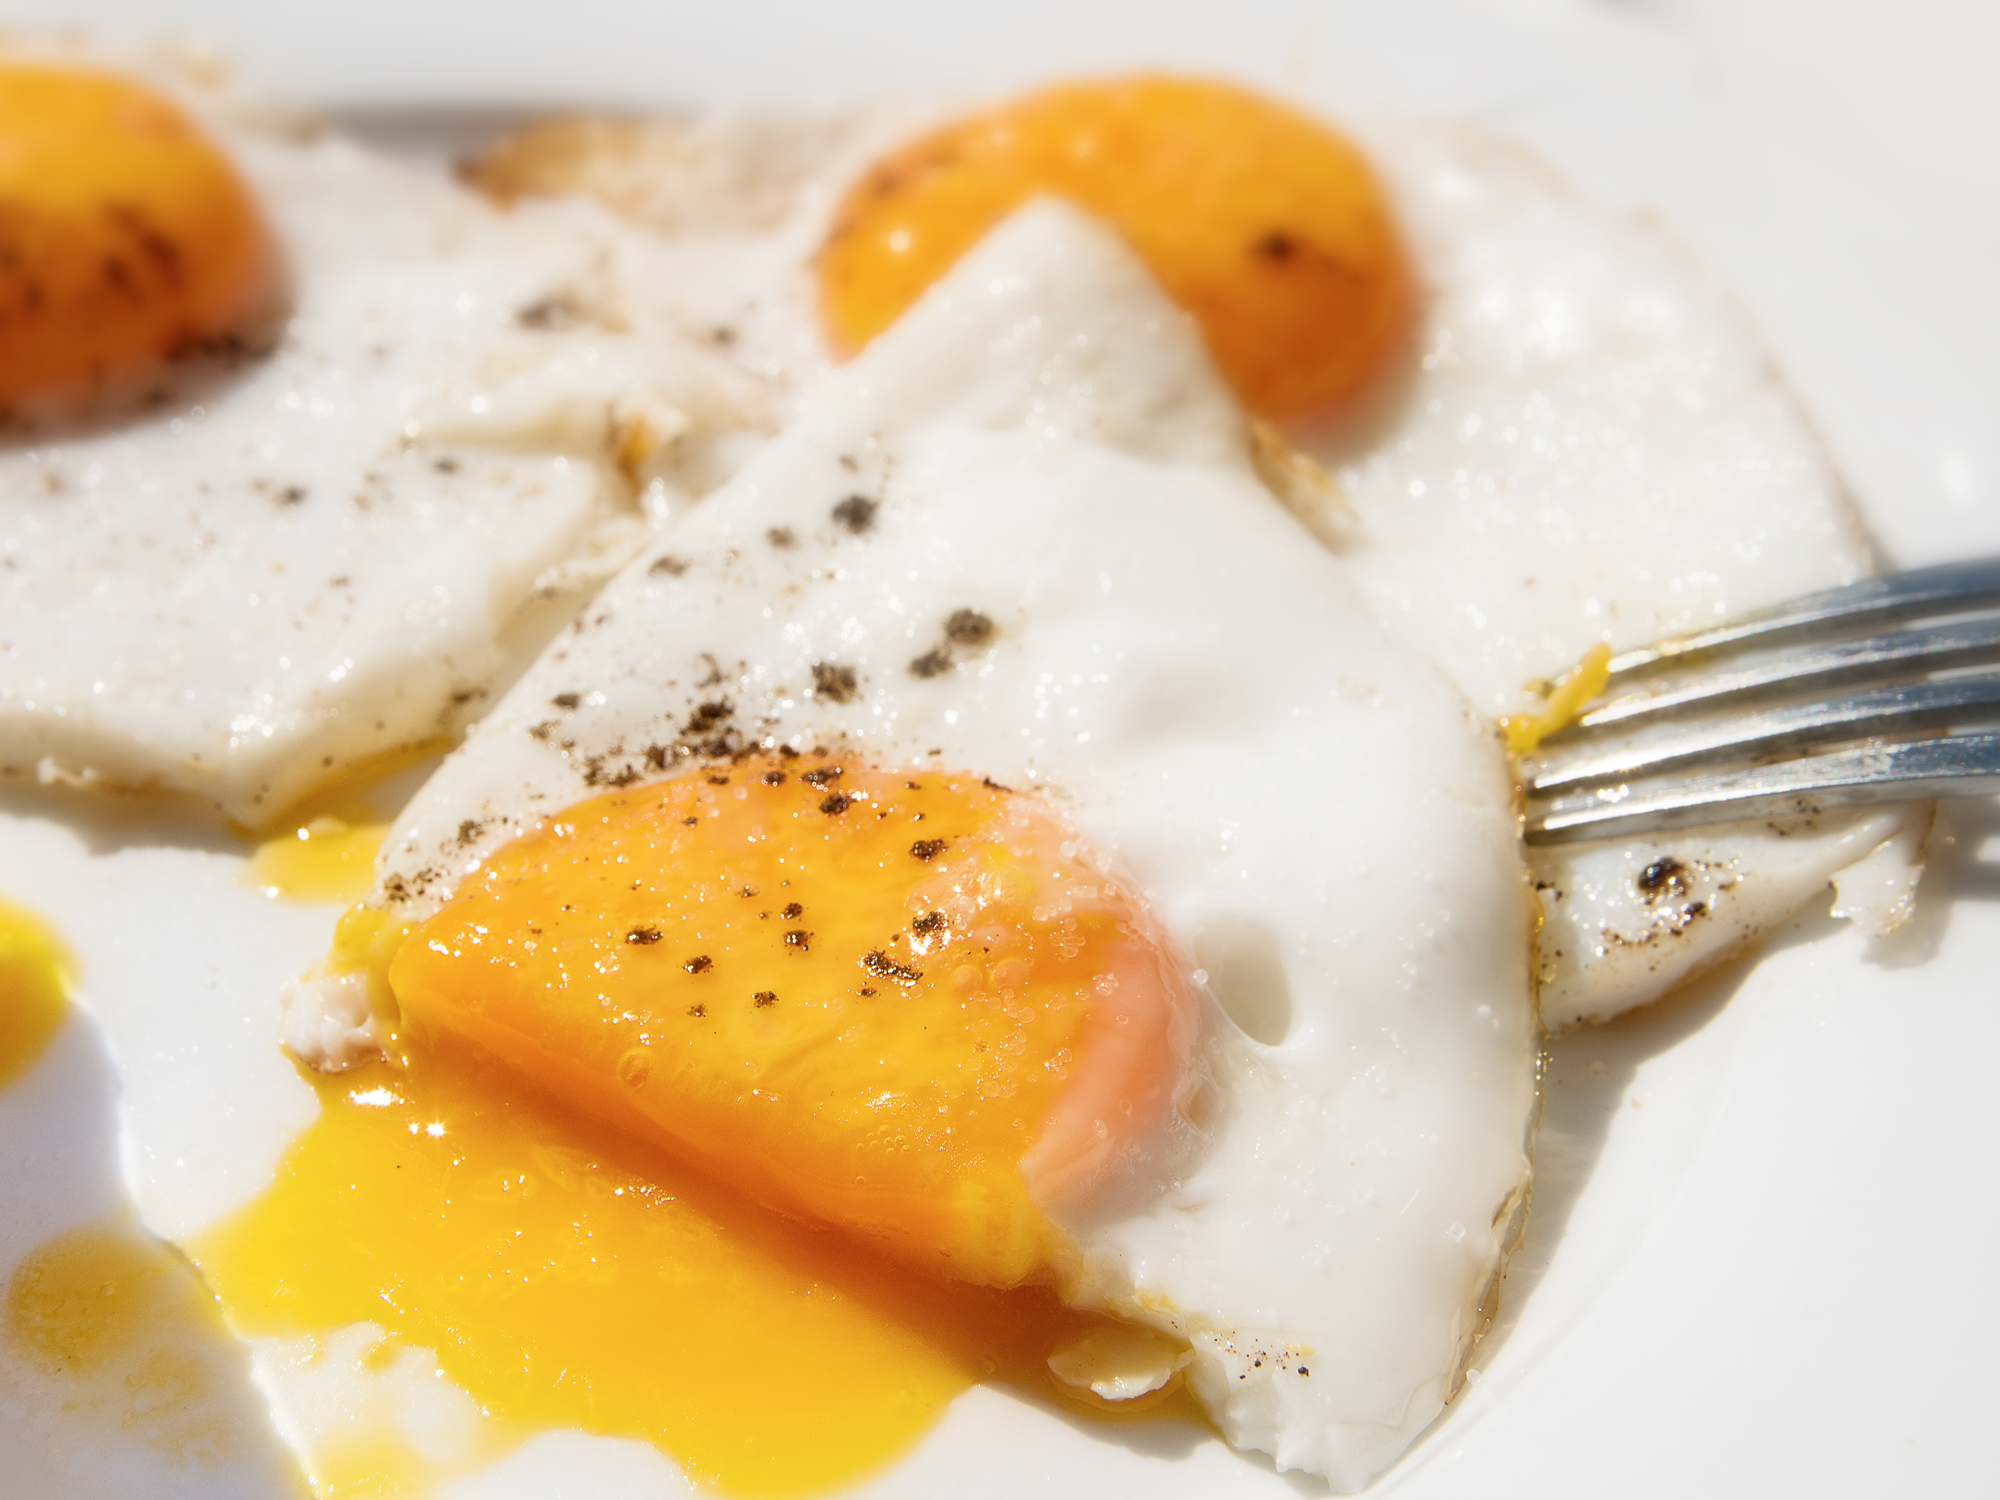 We were so wrong about eggs